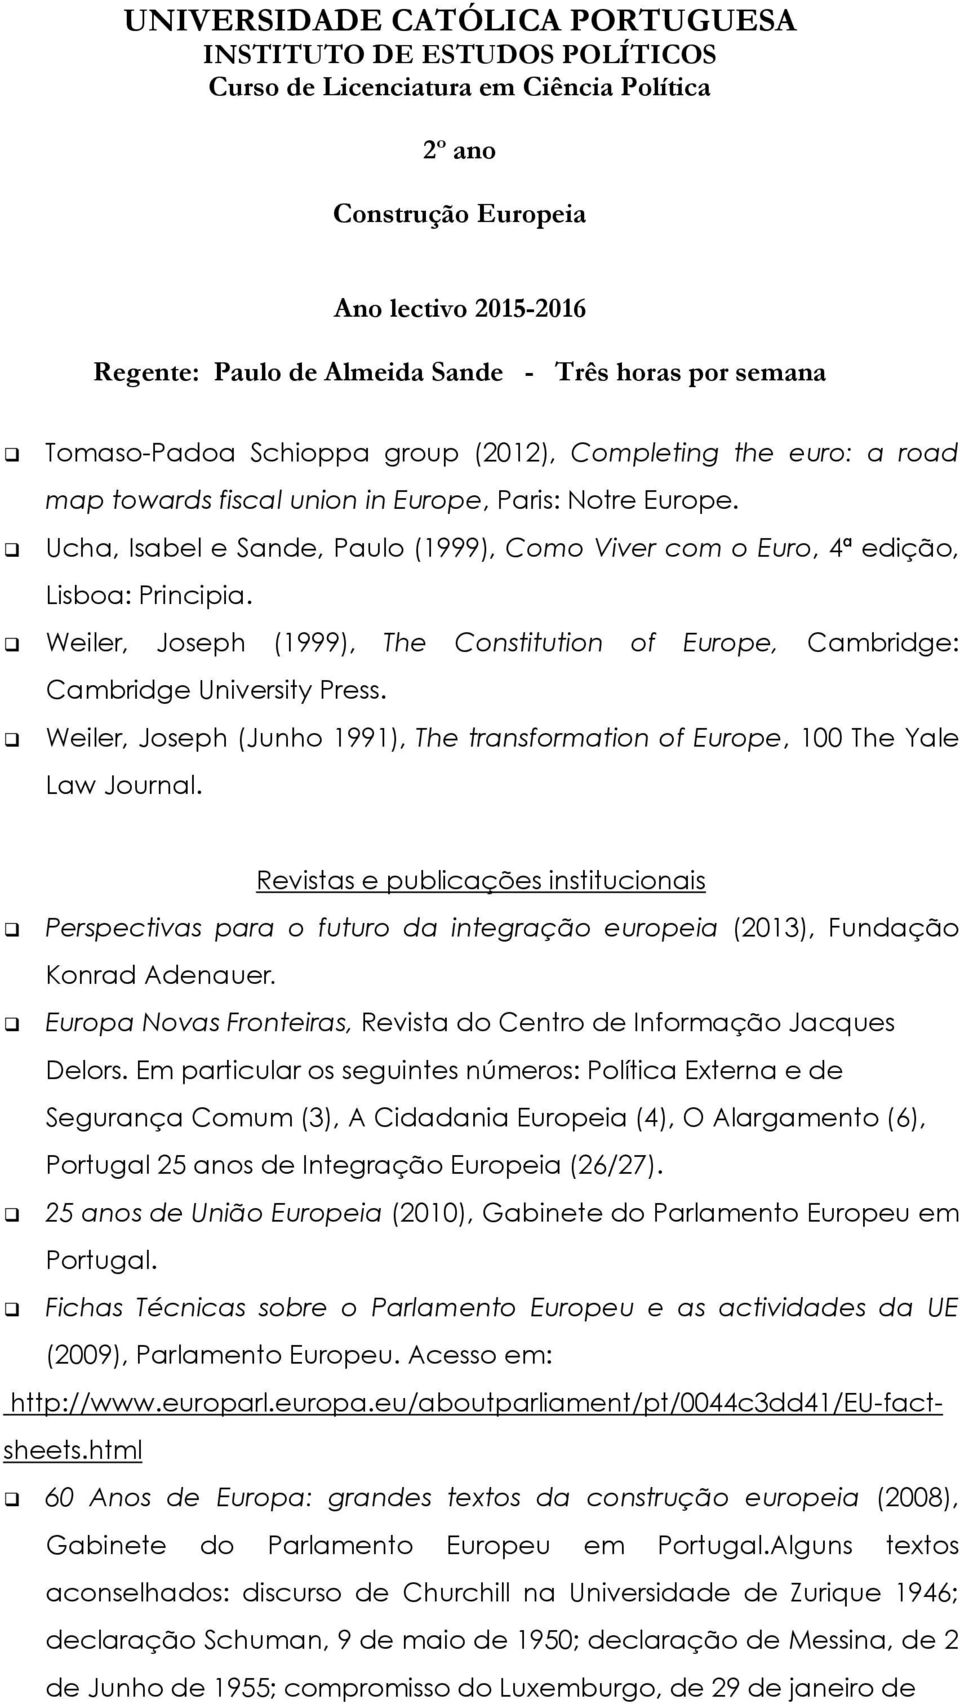 Weiler, Joseph (Junho 1991), The transformation of Europe, 100 The Yale Law Journal.